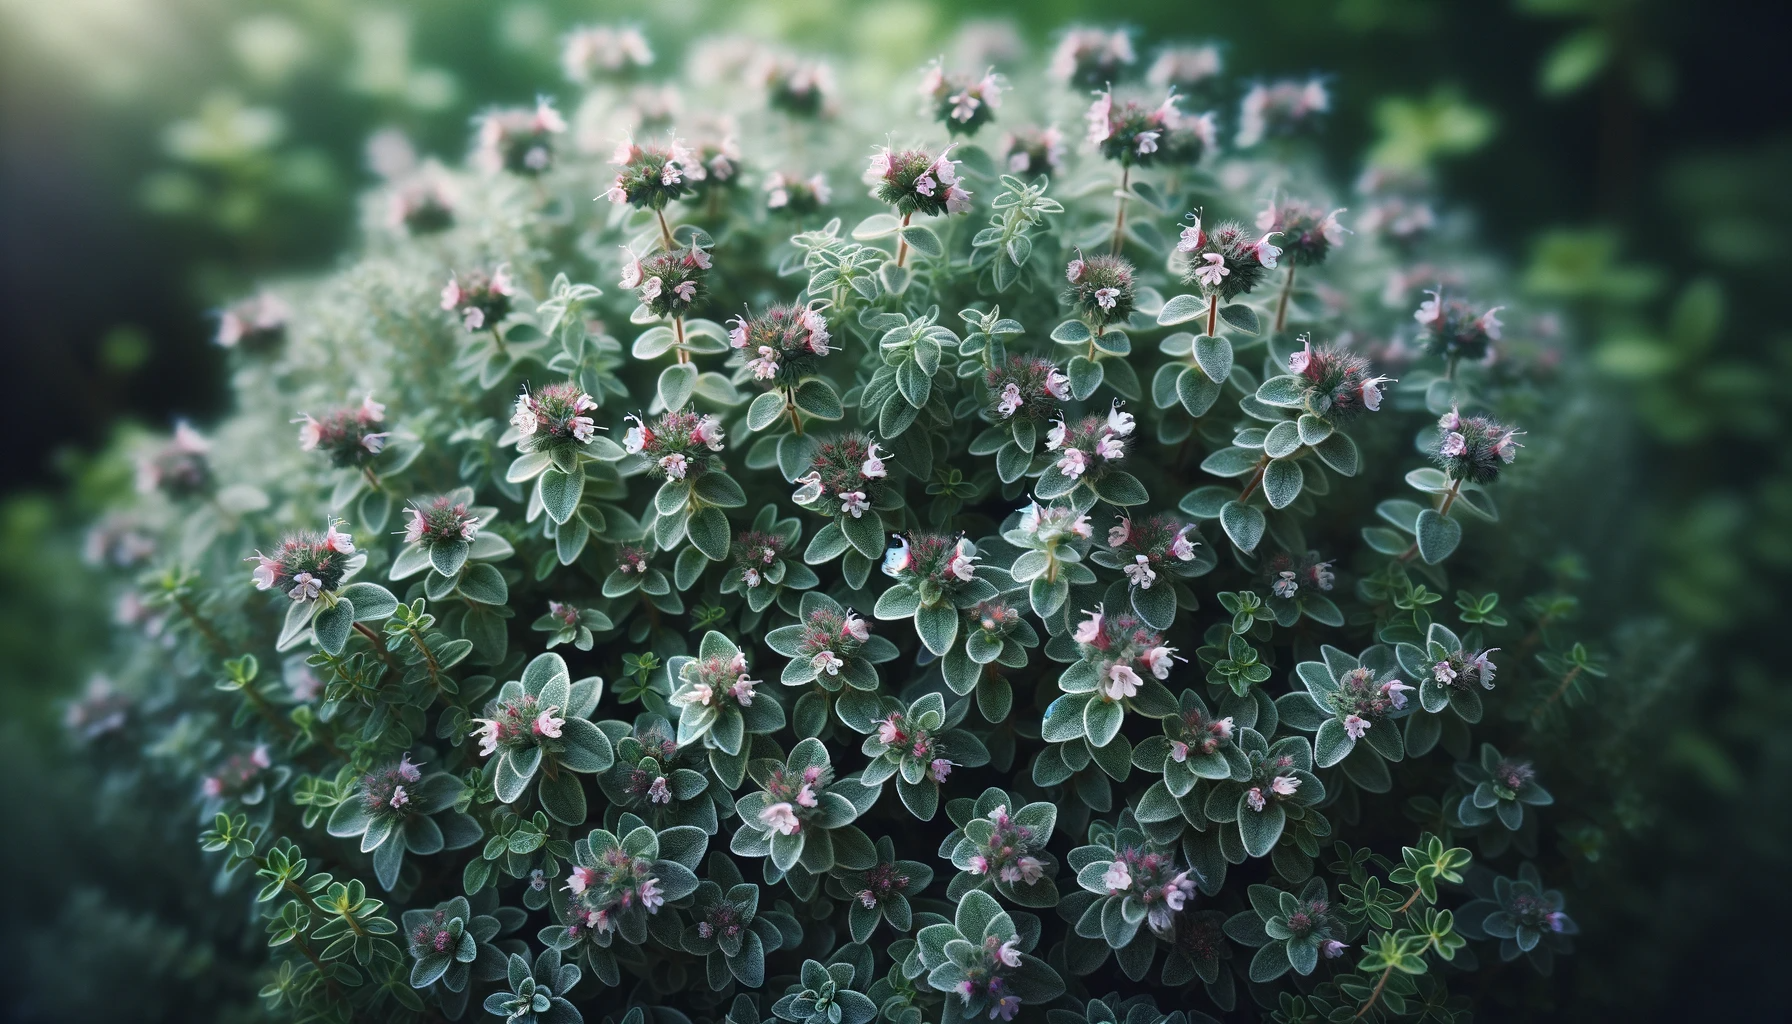 Thyme: From Garden to Apothecary